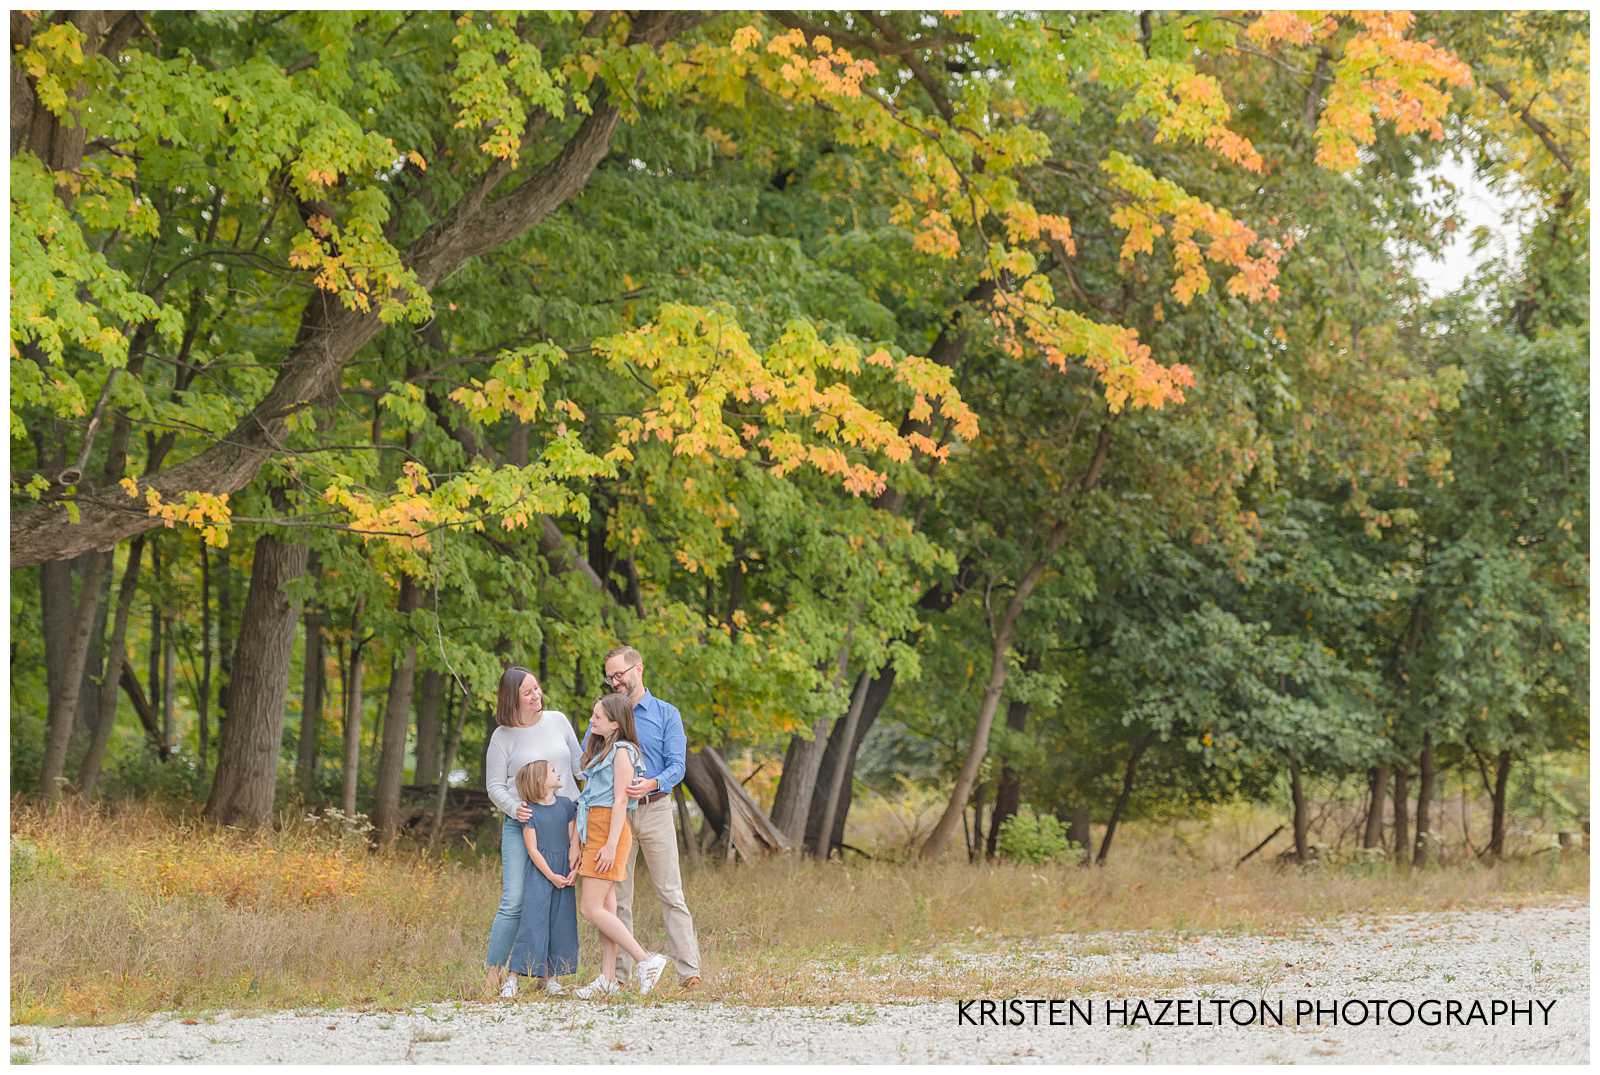 early Fall family photos under a sugar maple tree by River Forest, IL photographer Kristen Hazelton